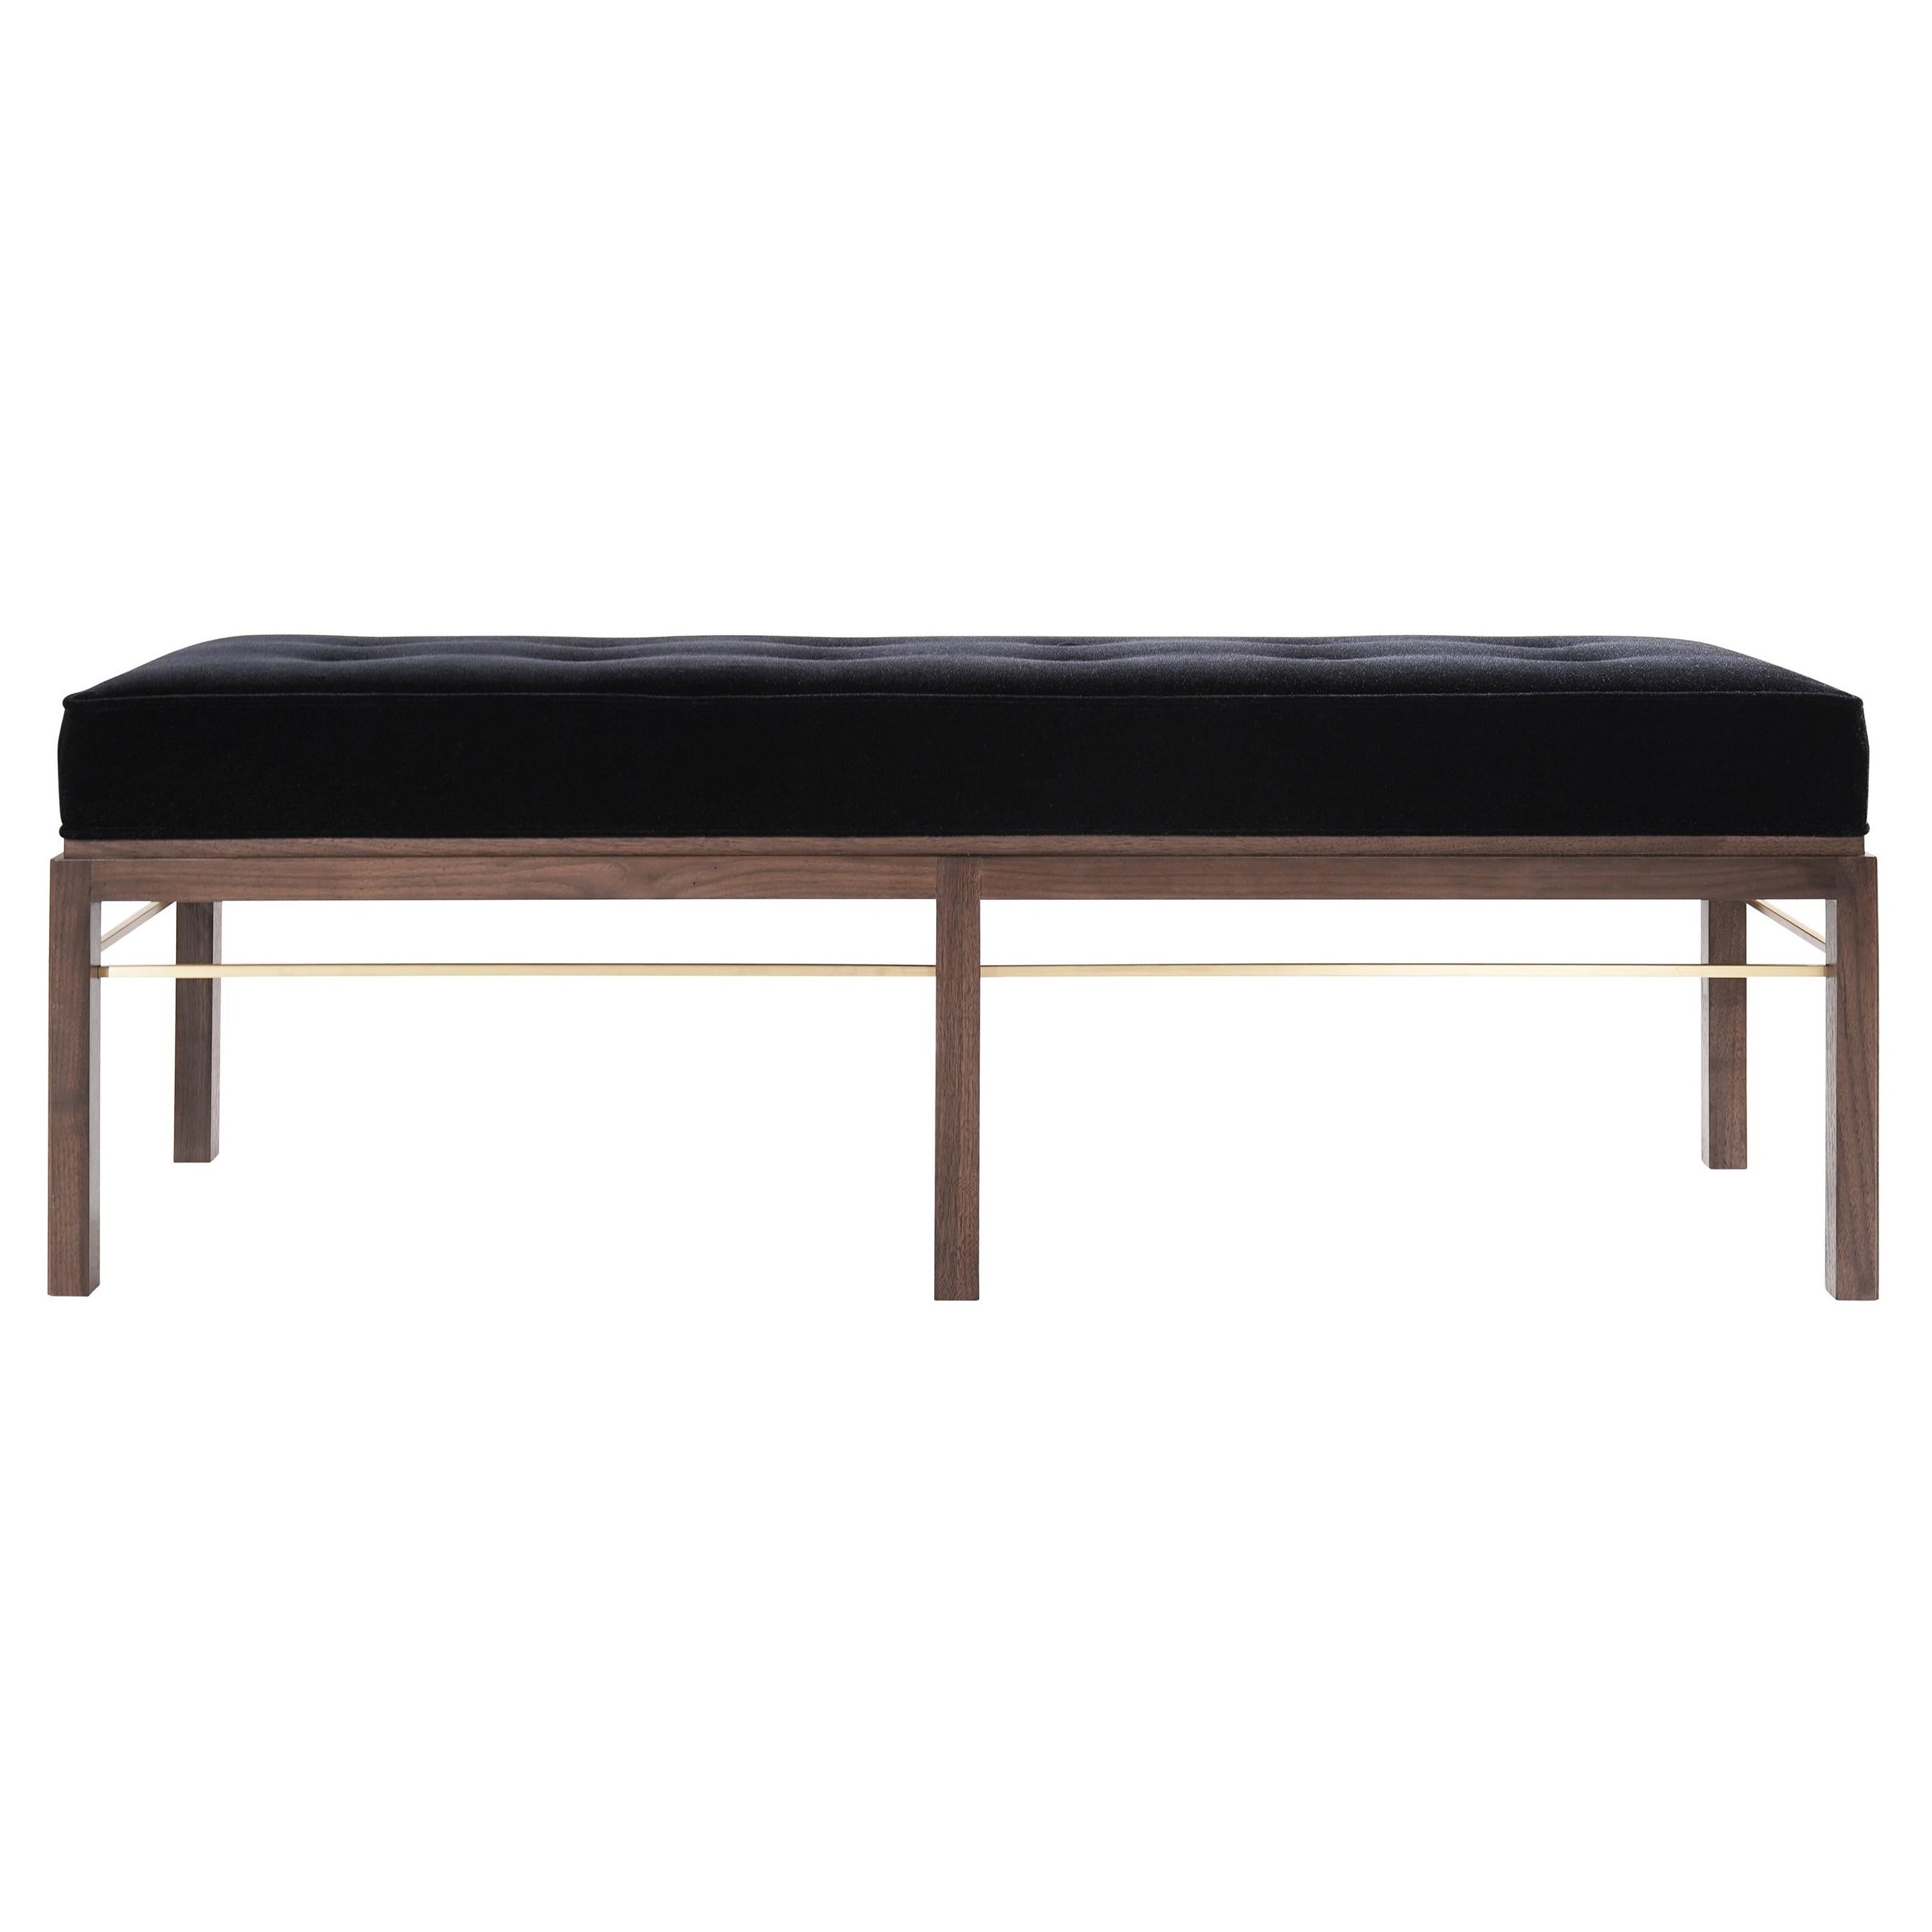 Brass-Accented Edward Wormley for Dunbar Bench in Mohair, 1950s